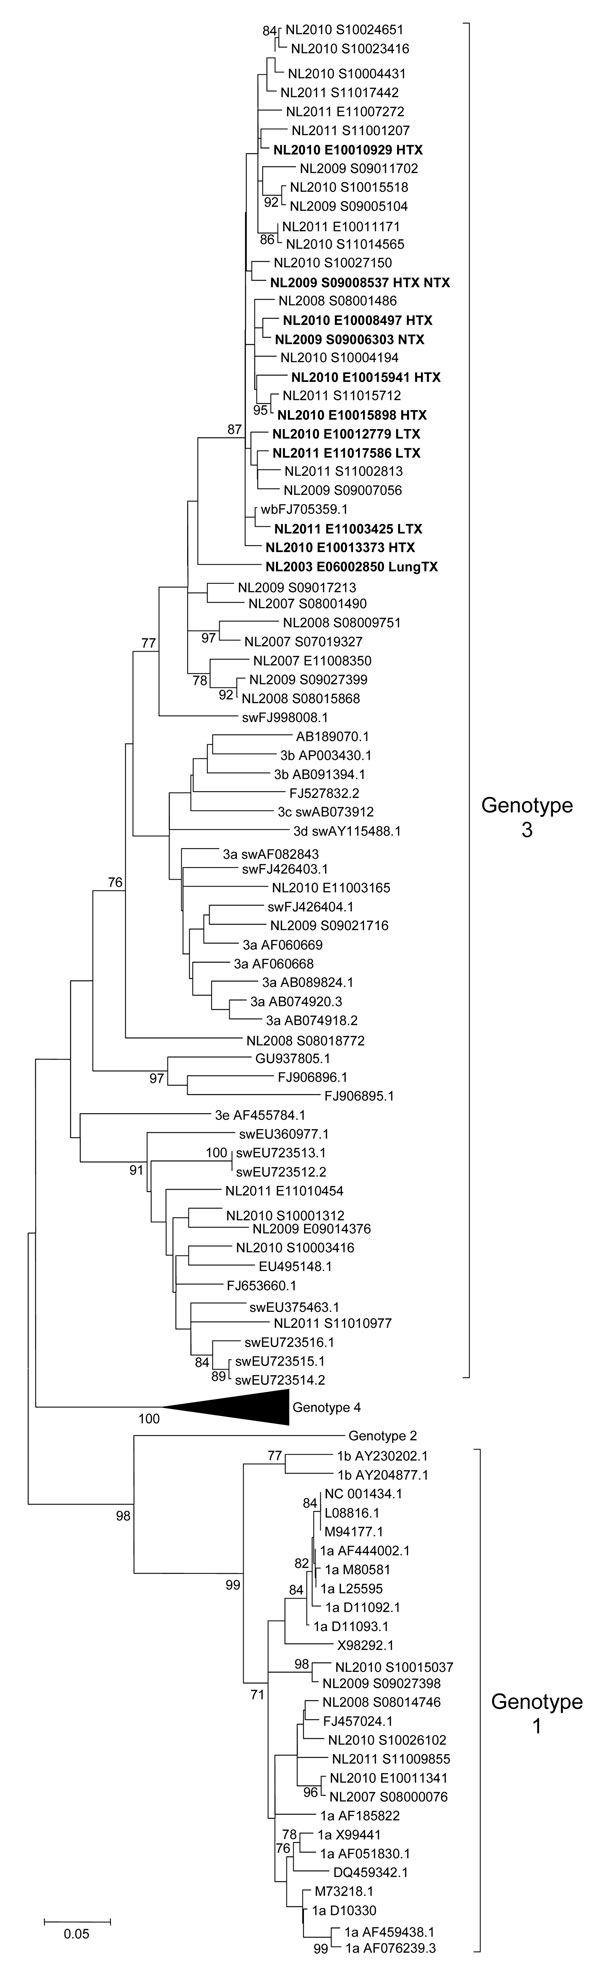 Phylogenetic tree of hepatitis E virus (HEV) open reading frame (ORF) 1 sequences, including HEV infections, the Netherlands, 2000–2011. Phylogenetic relation of a 306-bp ORF1 region was calculated by using maximum-likelihood, Kimura 2-parameter analysis with bootstrapping (n = 1,000). HEV sequences originating in the Netherlands are indicated as NL with year of isolation and isolate number (GenBank accession nos. JQ015399–JQ015448). Boldface indicates virus strains of chronic HEV-infected solid